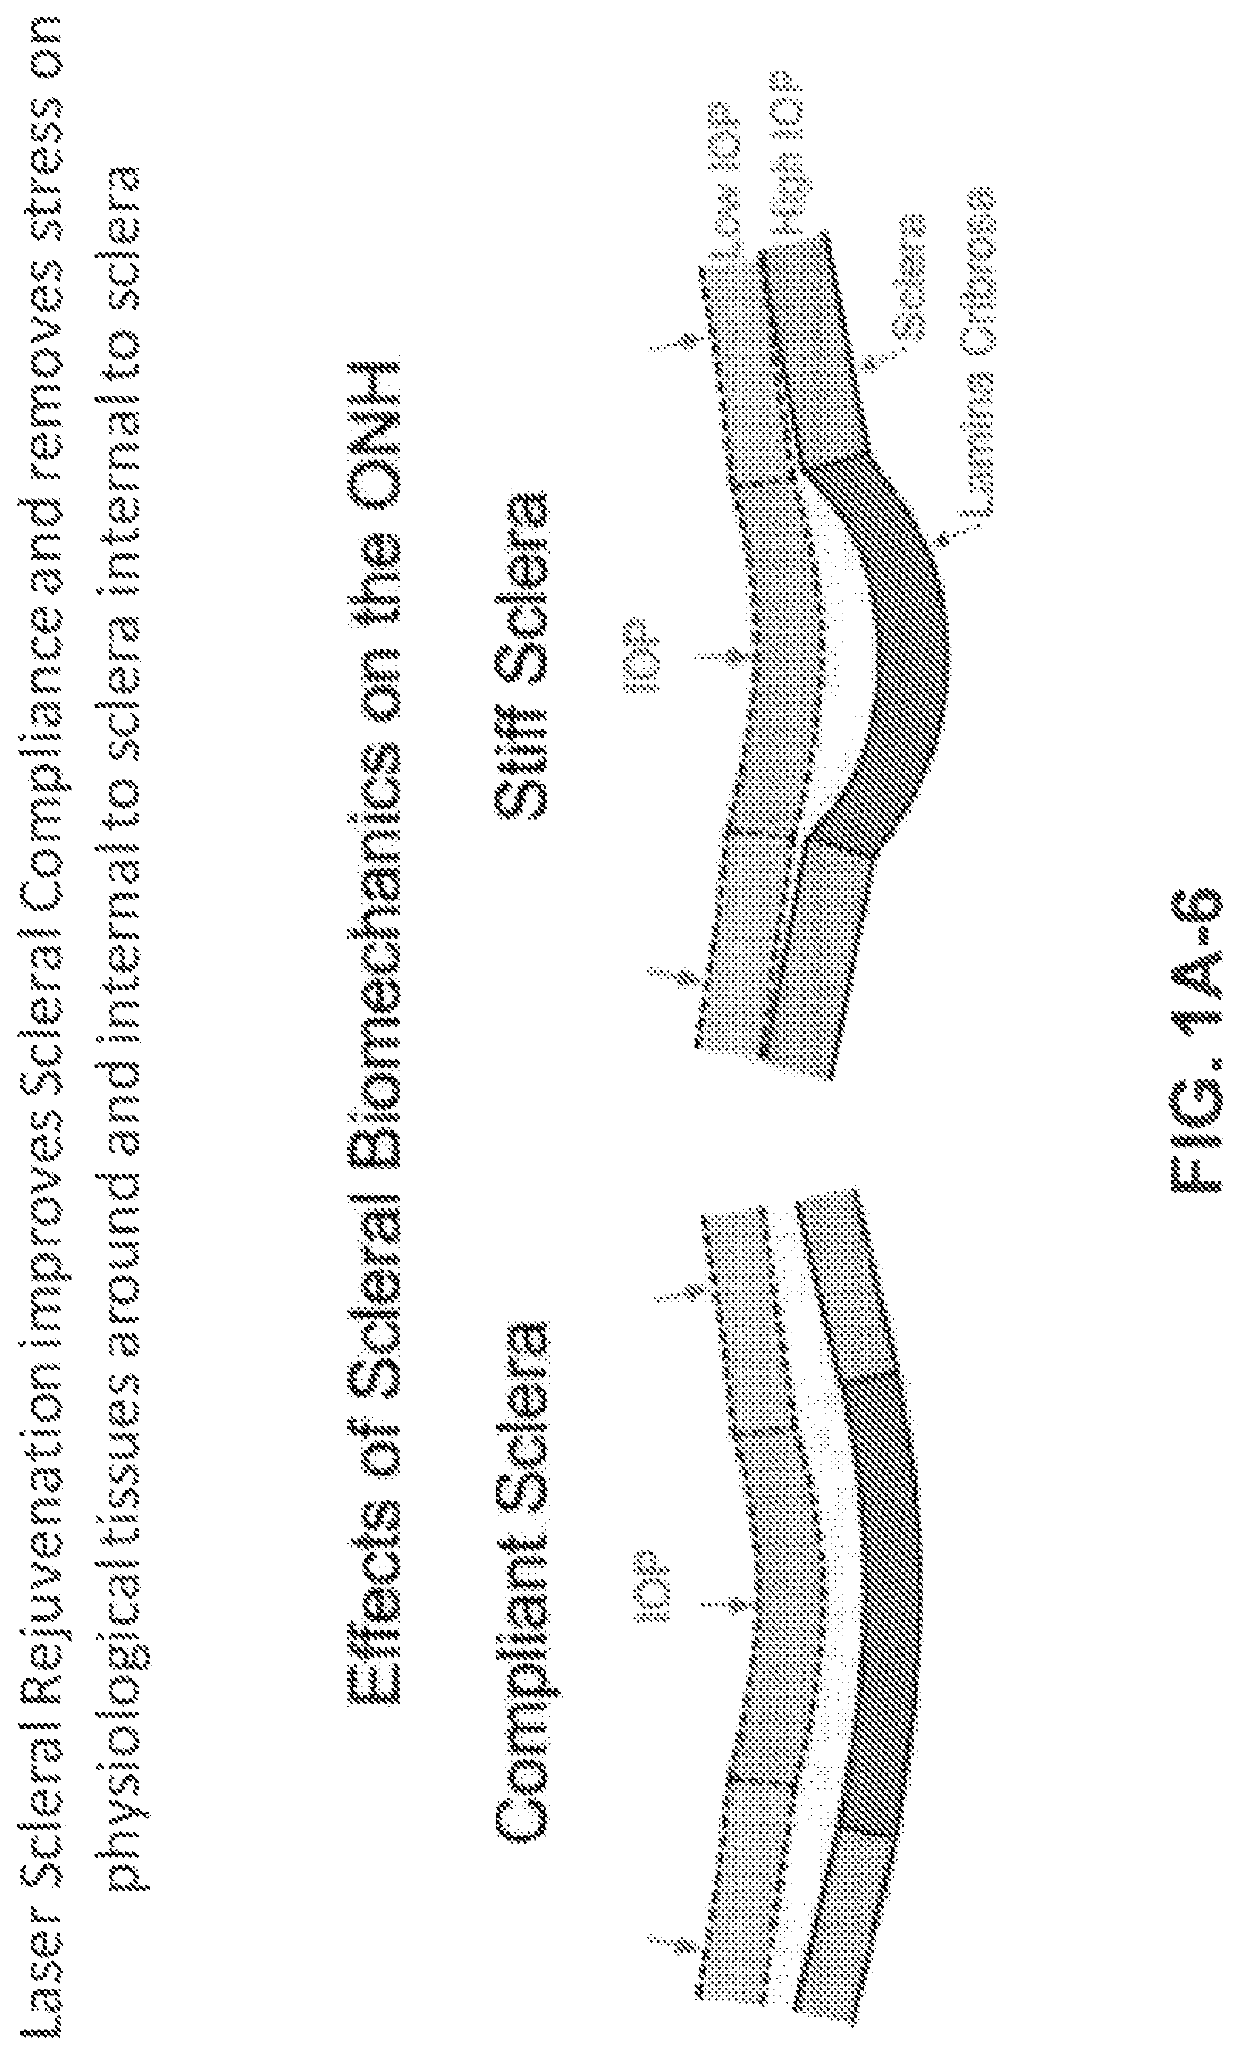 Systems and methods for ocular laser surgery and therapeutic treatments